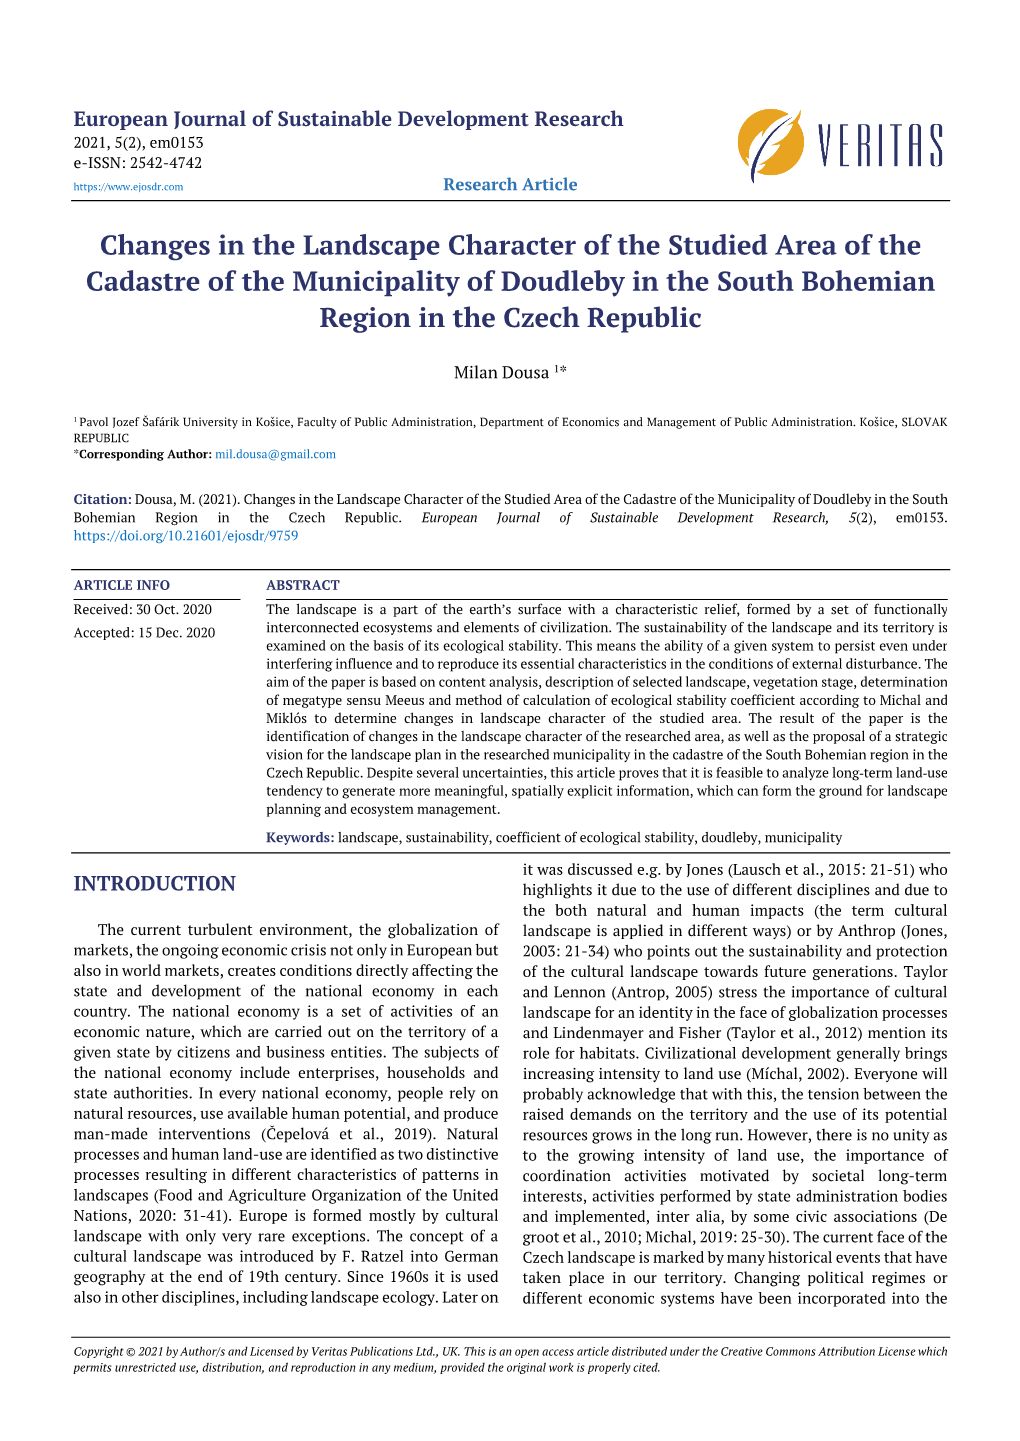 Changes in the Landscape Character of the Studied Area of the Cadastre of the Municipality of Doudleby in the South Bohemian Region in the Czech Republic